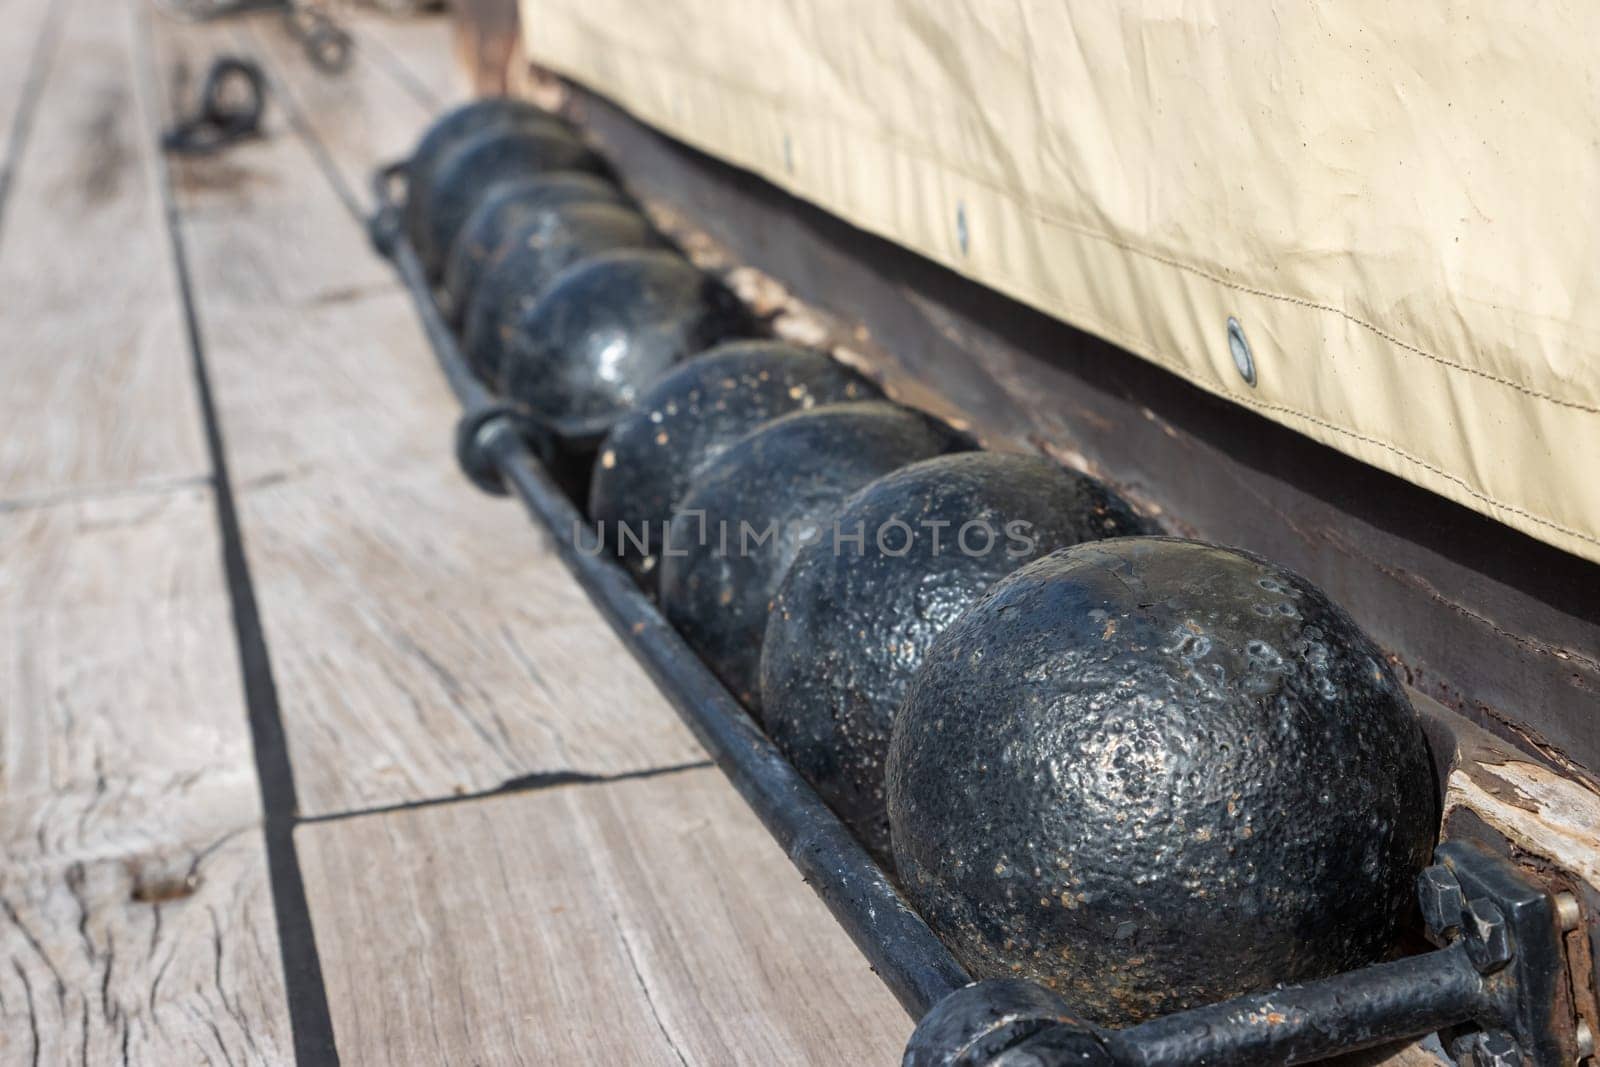 The balls cores for cannon of the 18th century on the desk of old sail battleship, daylight